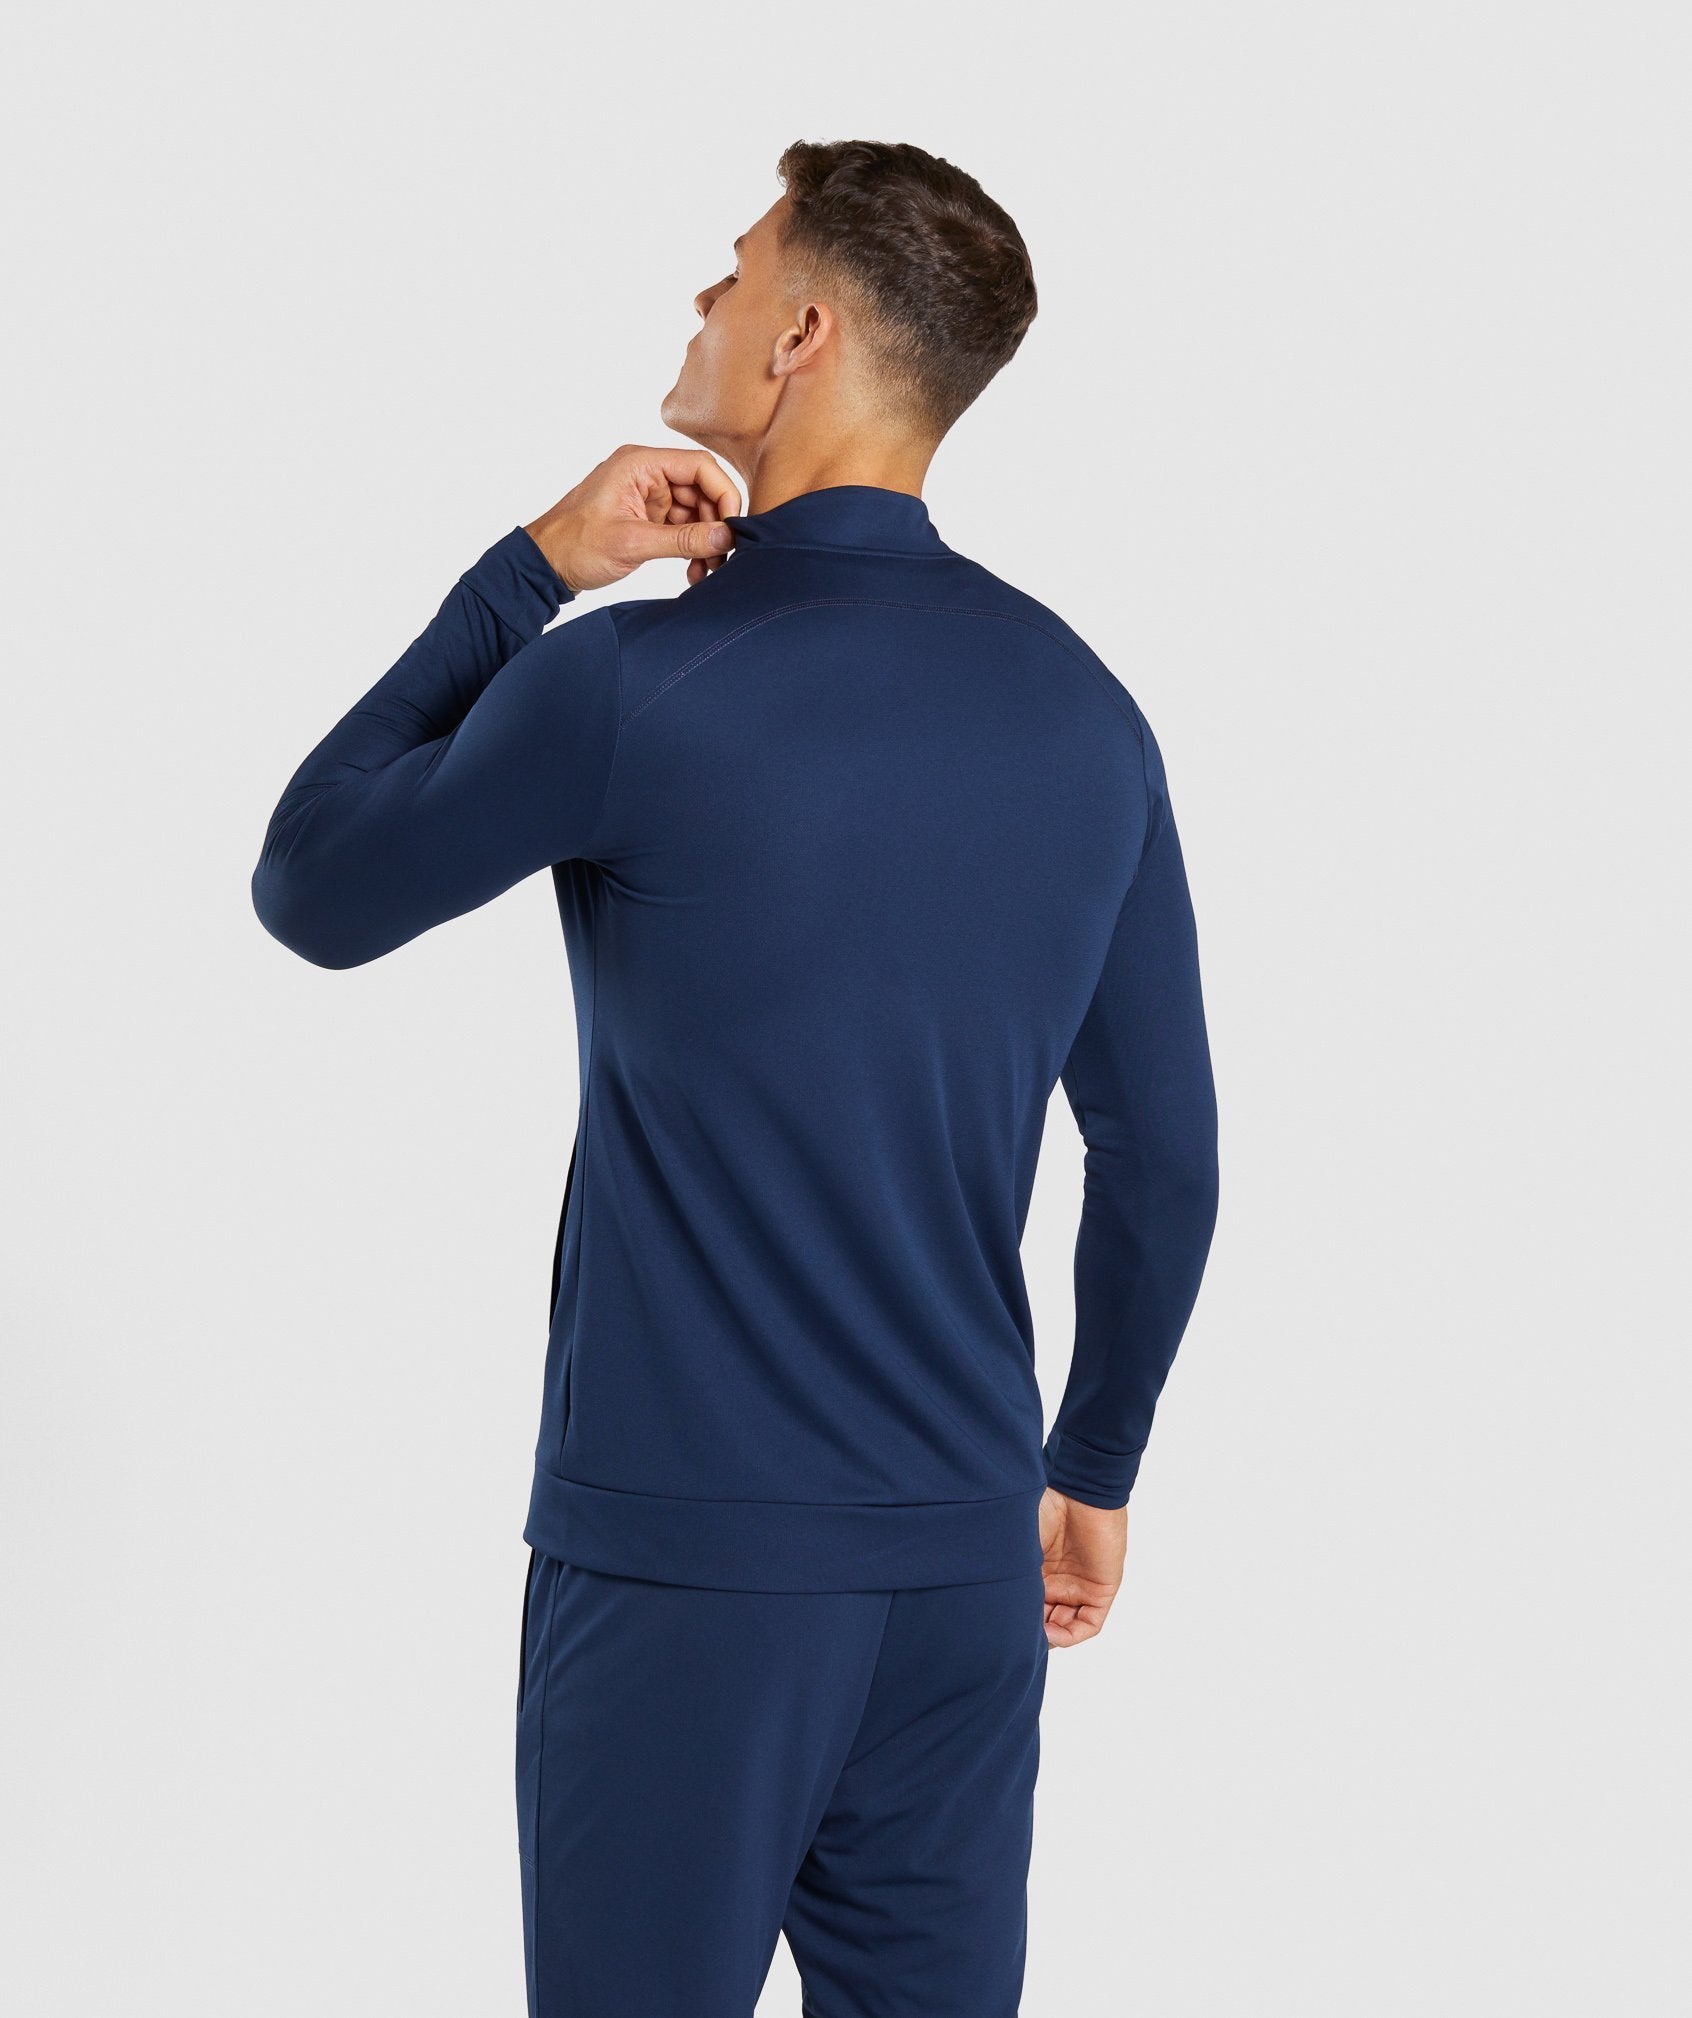 Flatlock Track Top in Sapphire Blue - view 2